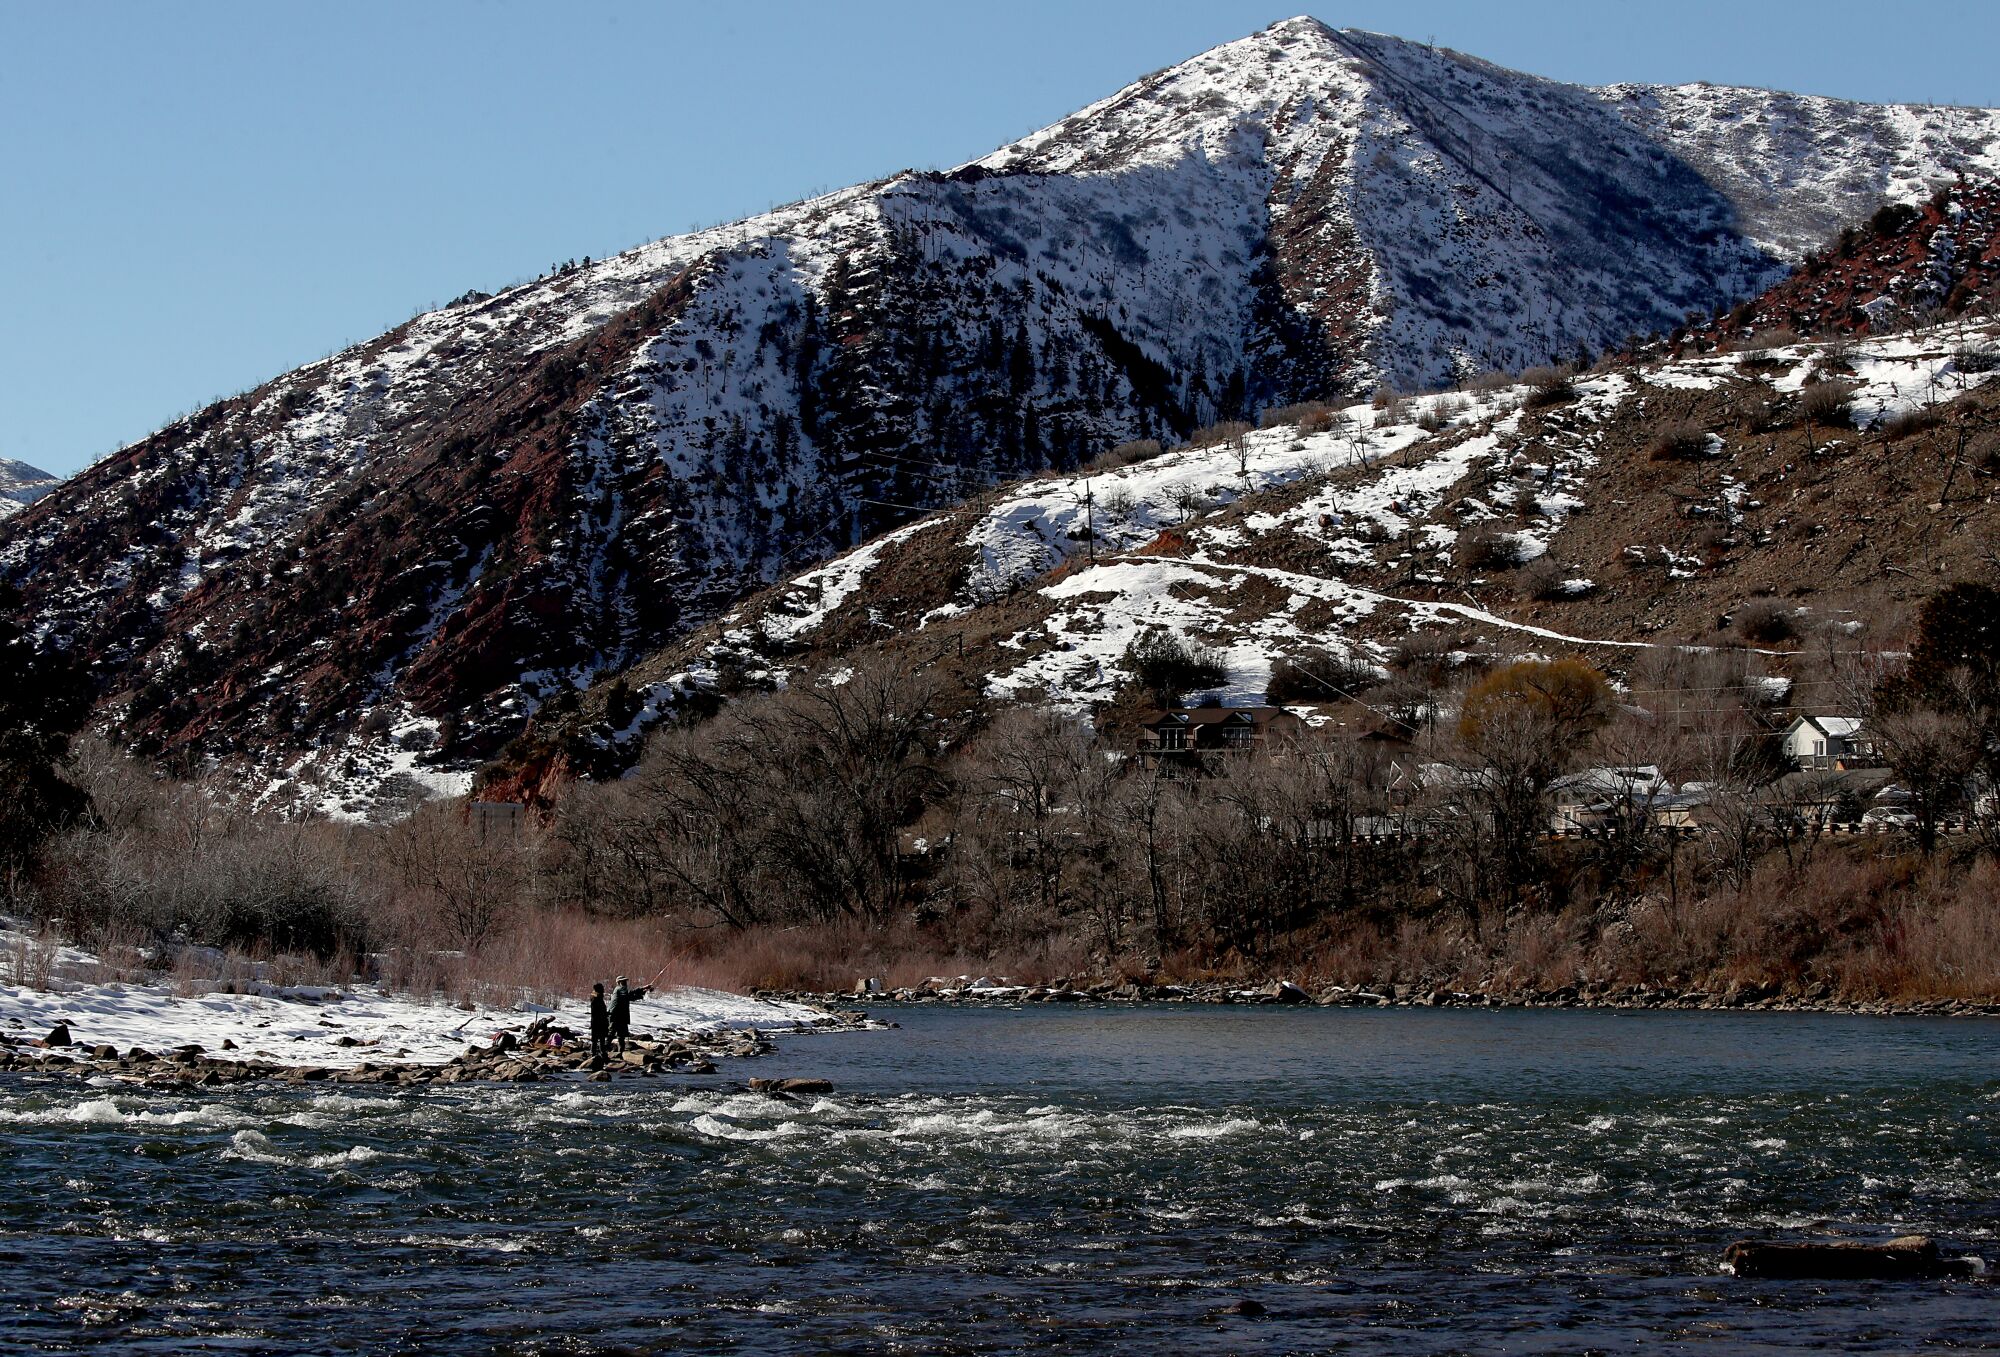 Fishermen cast their lines into the Colorado River in Glenwood Springs, where the Roaring Fork River meets the Colorado.